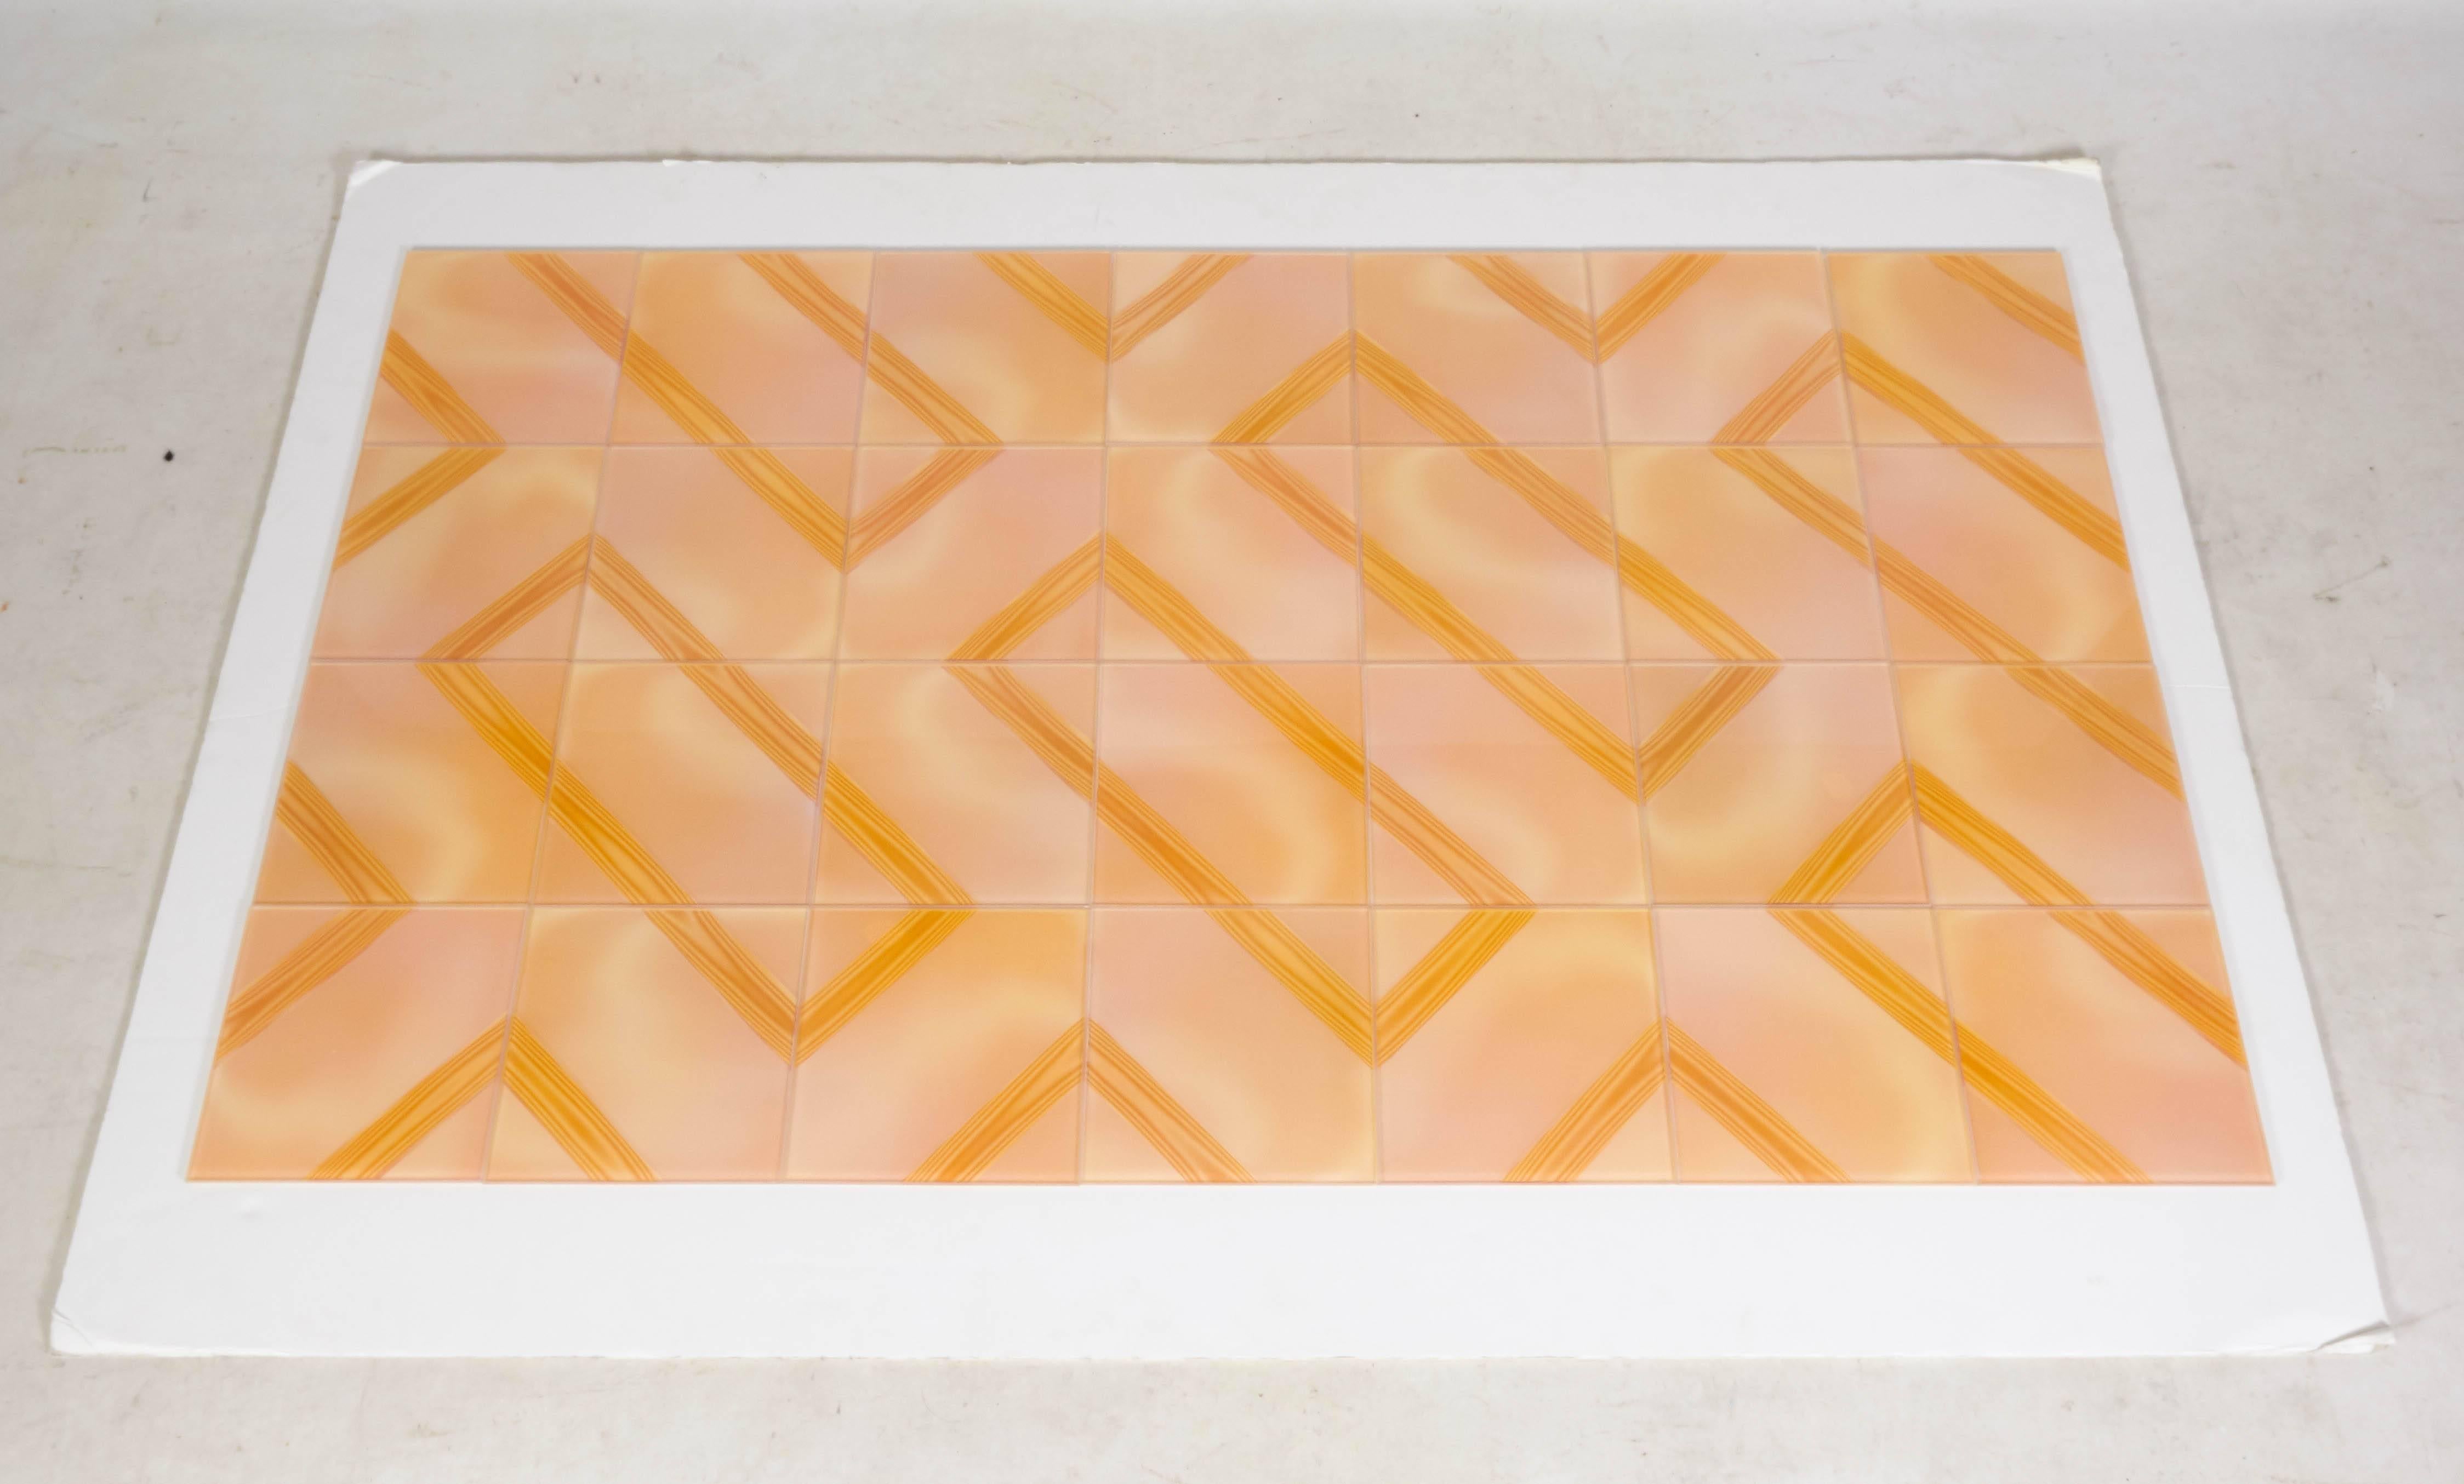 A collection of new old stock vintage art glass wall tiles from Czechoslovakia, 1980s. Each tile has a wonderful optic effect and is infused with color and texture. When assembled the overall effect is playful and remarkable. There are a few